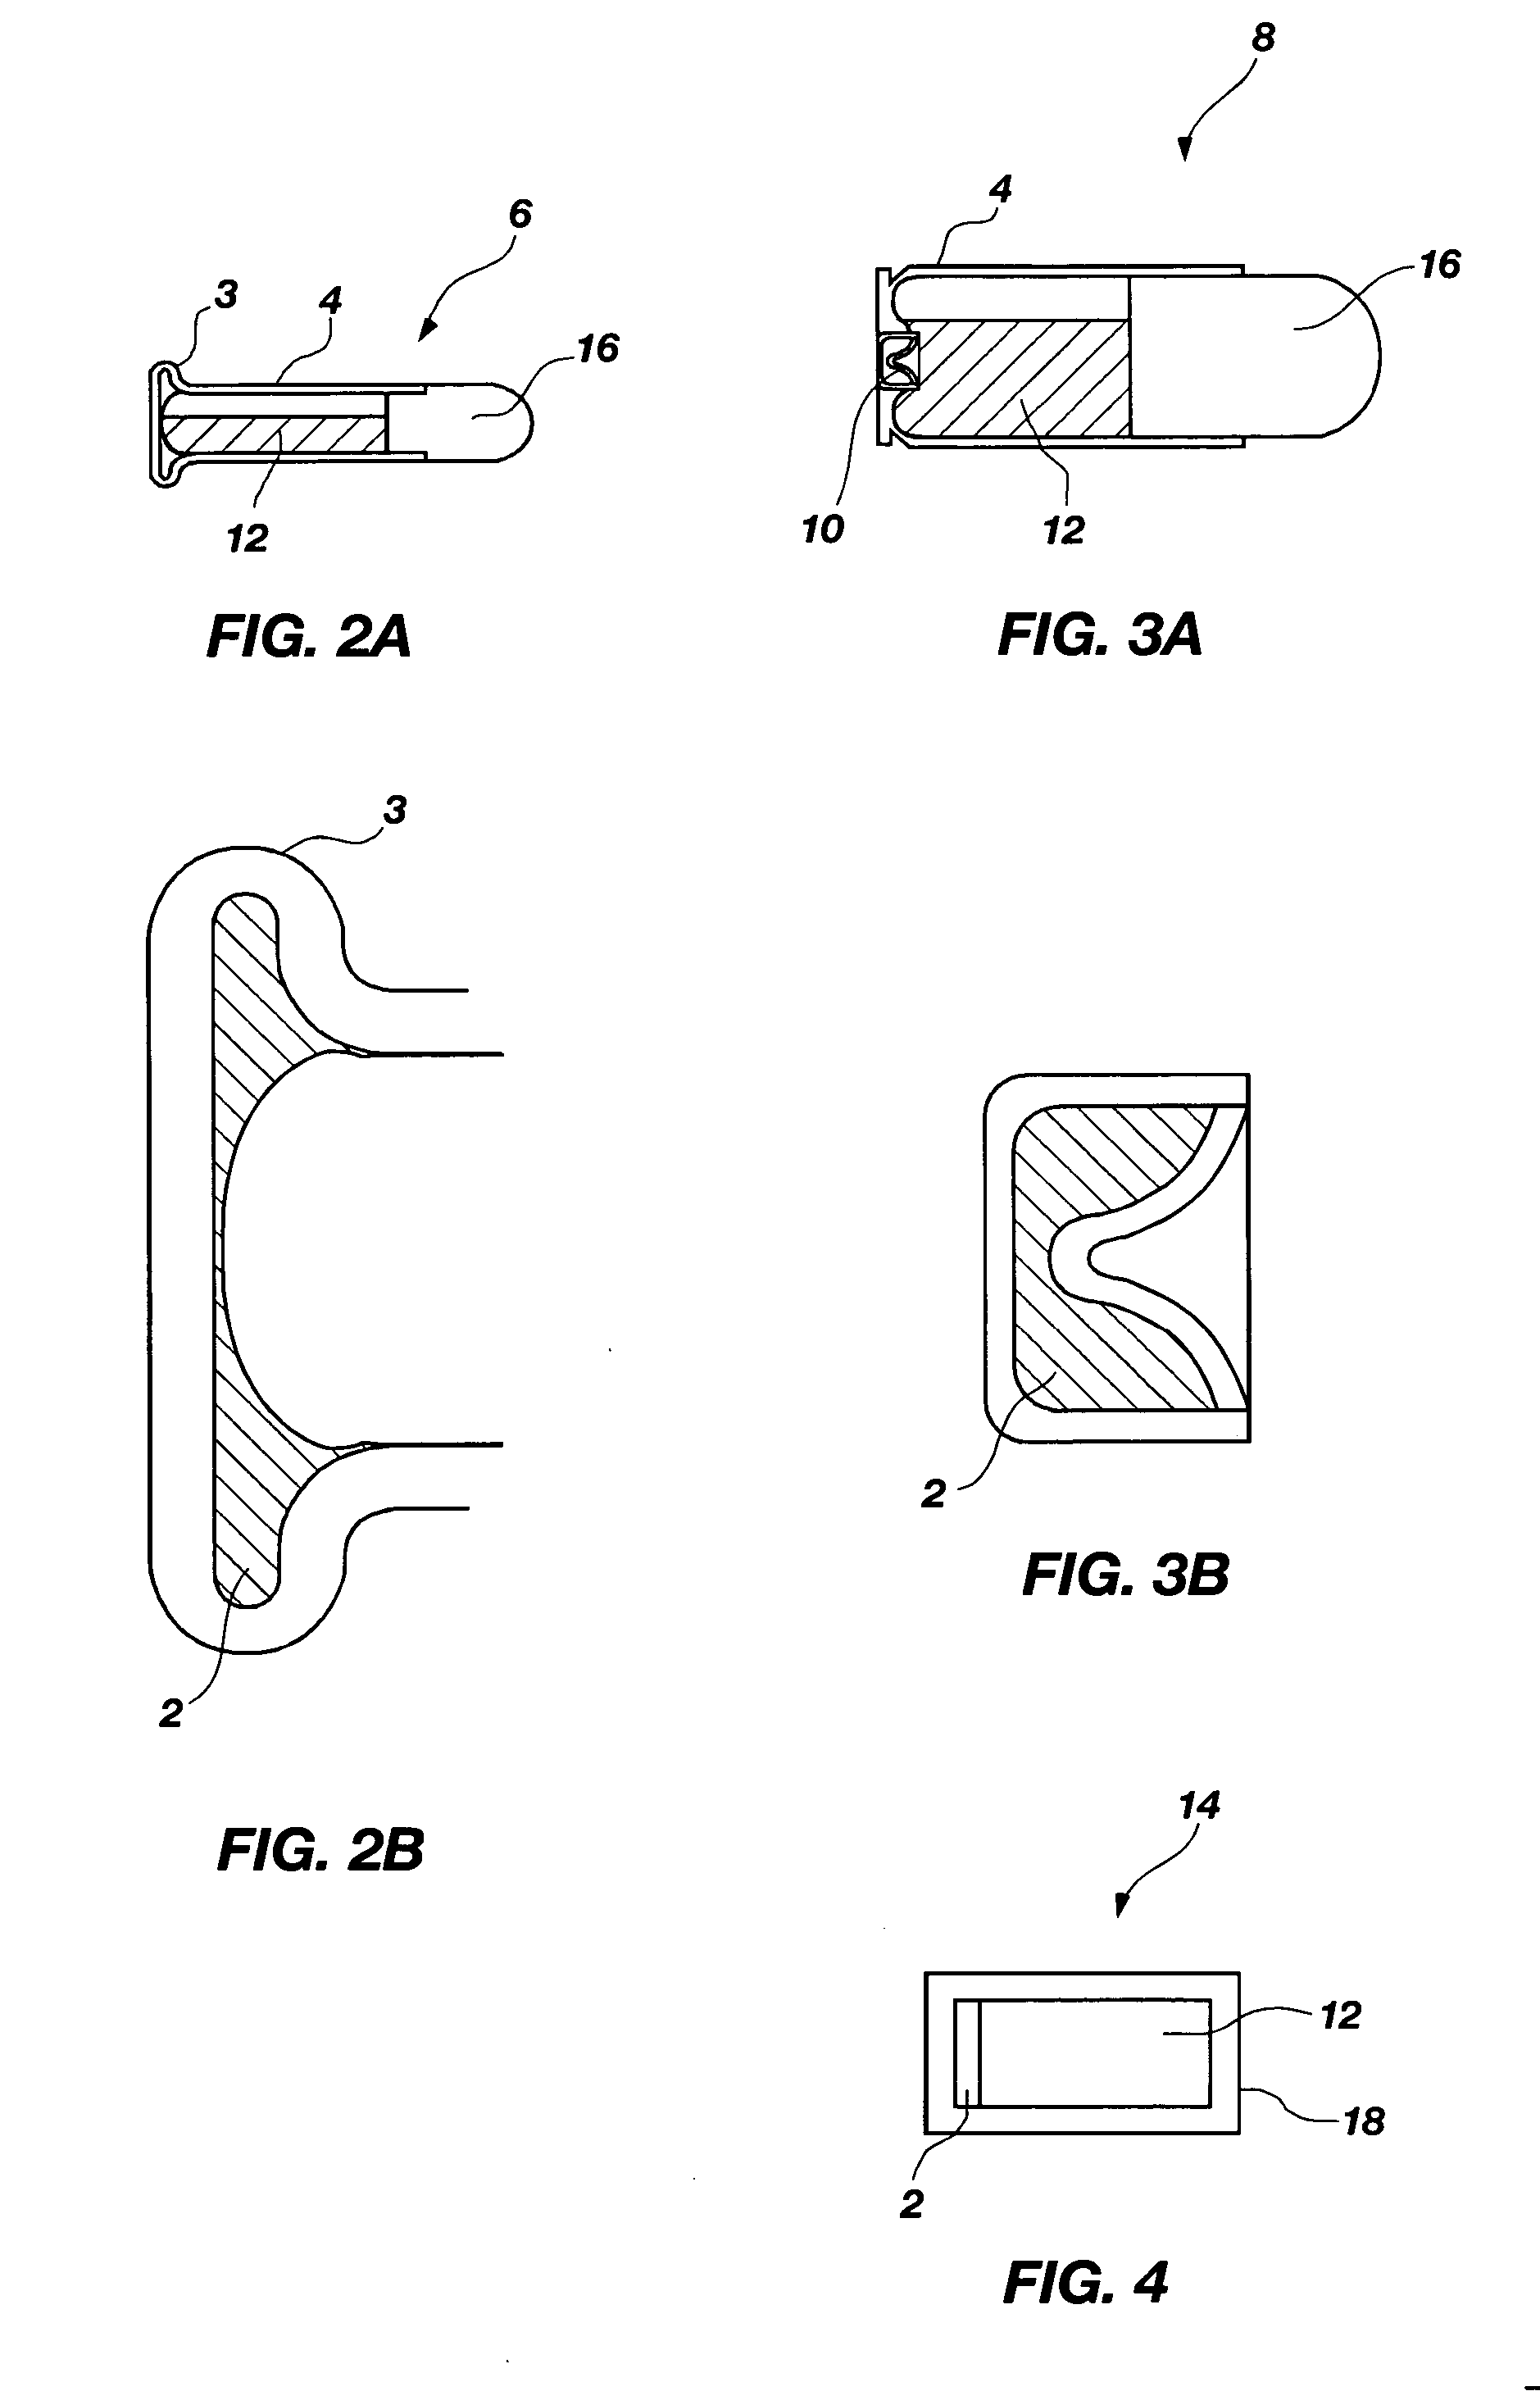 Heavy metal free, environmentally green percussion primer and ordnance and systems incorporating same